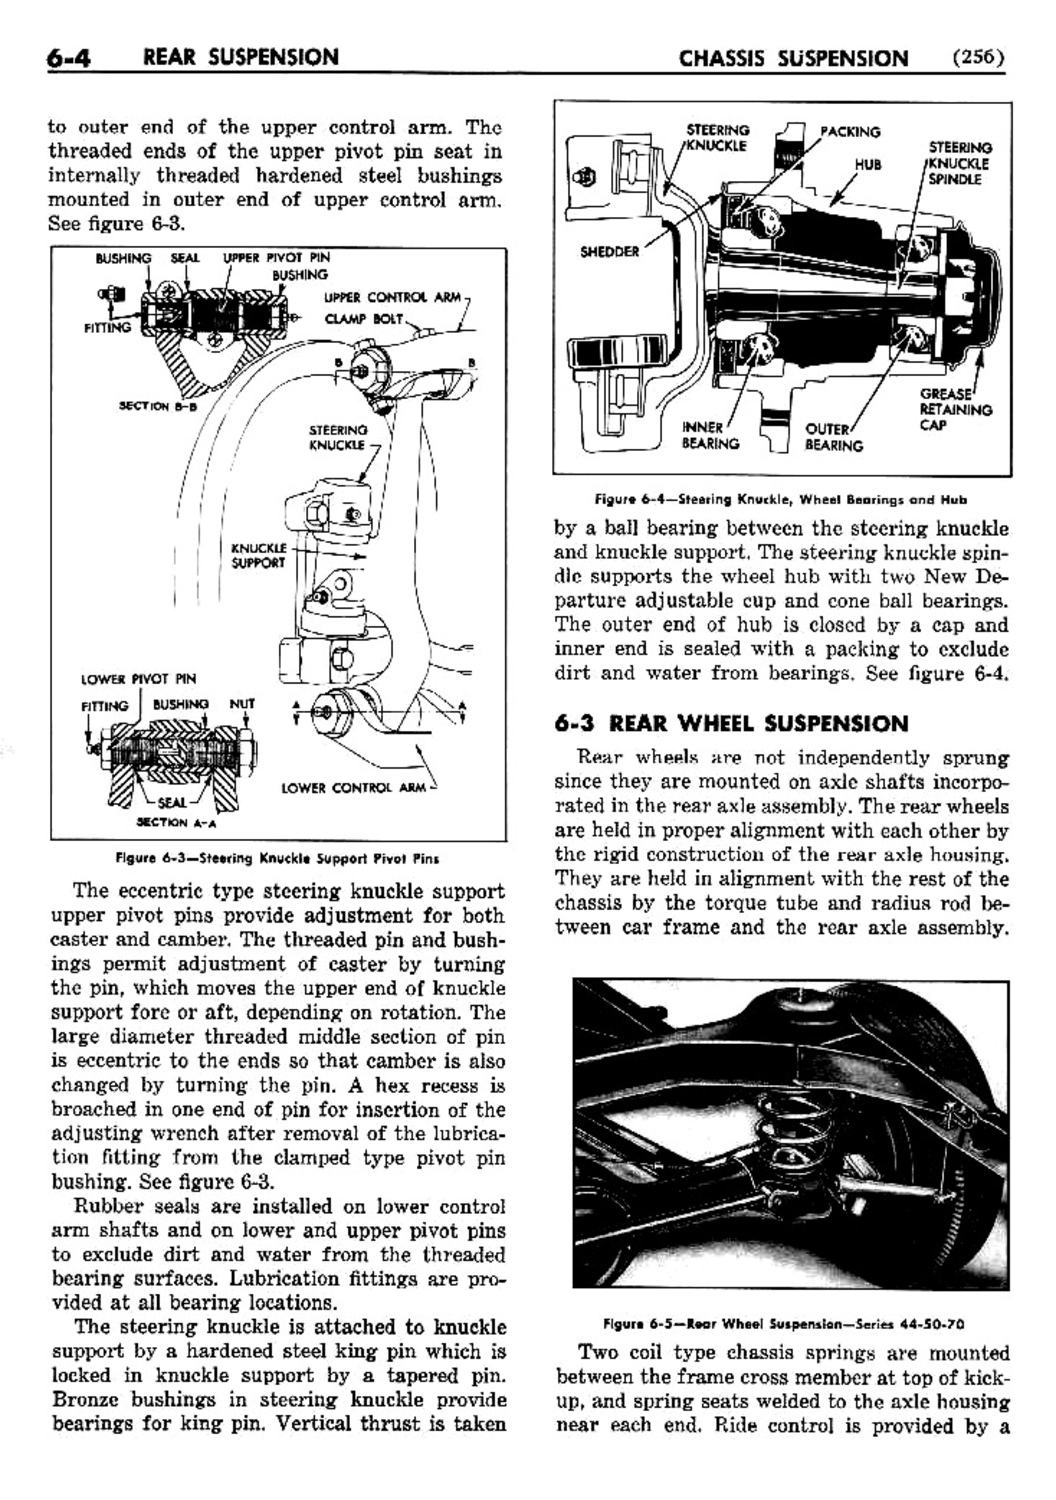 n_07 1952 Buick Shop Manual - Chassis Suspension-004-004.jpg